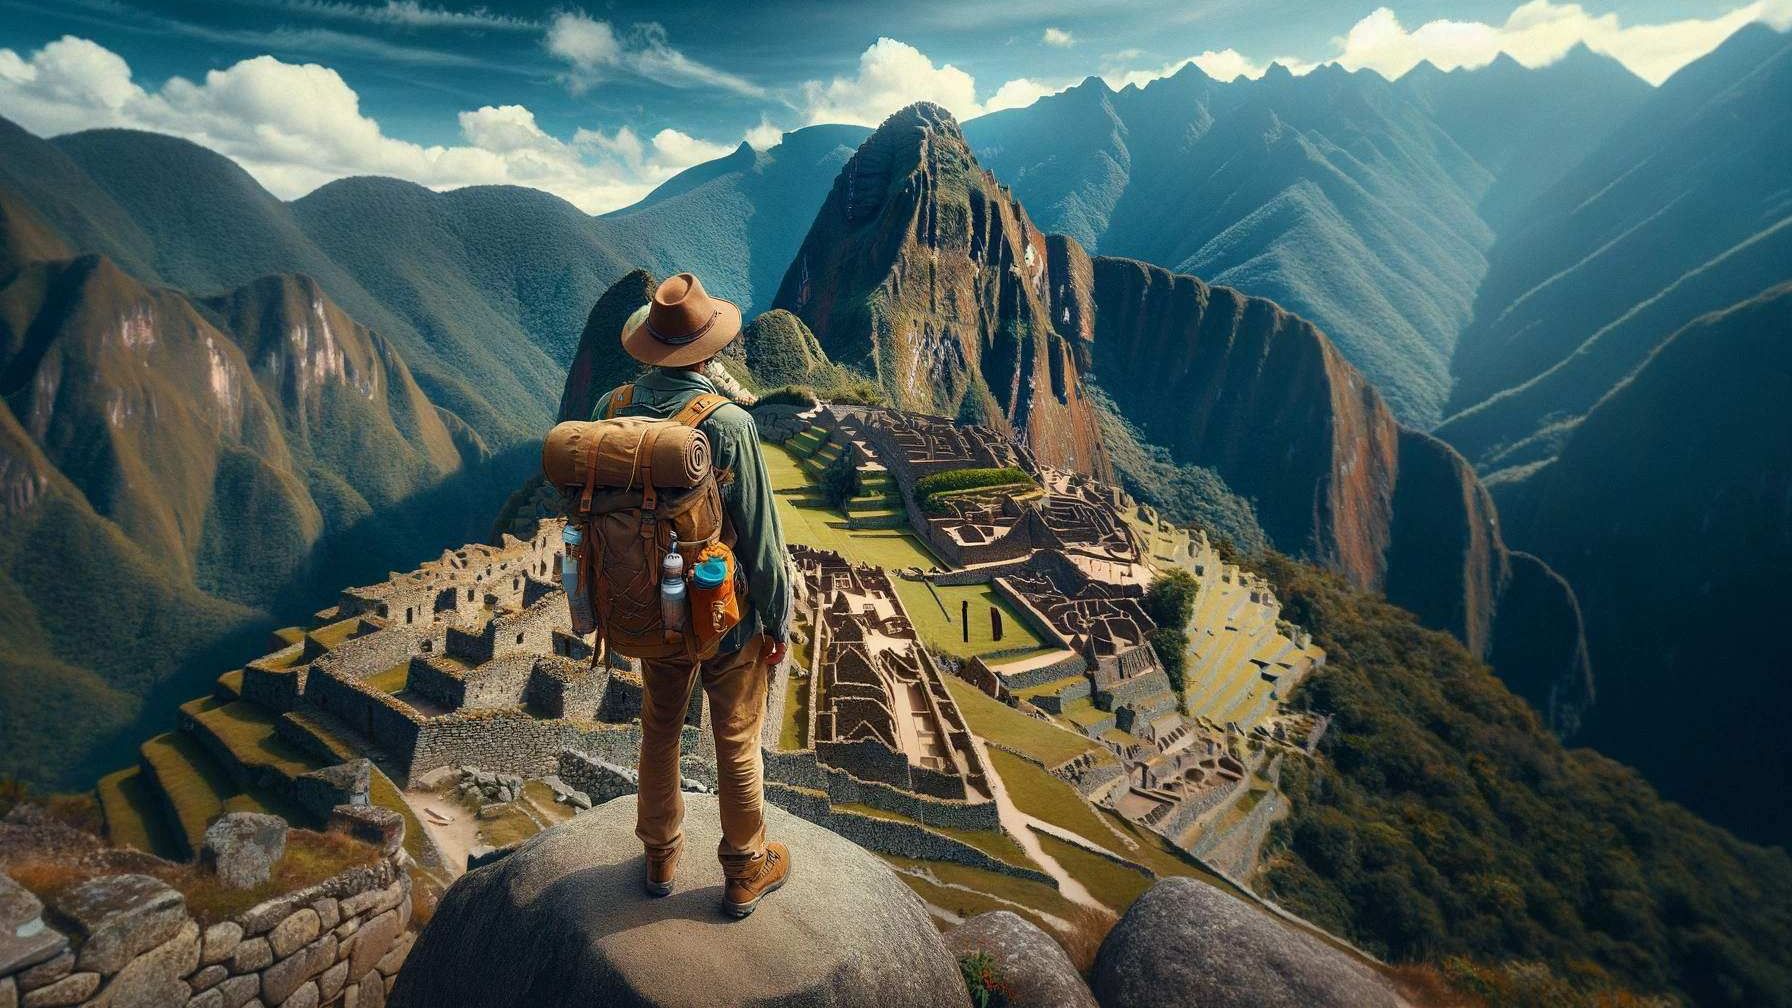 What should I bring for a day of exploration in Machu Picchu